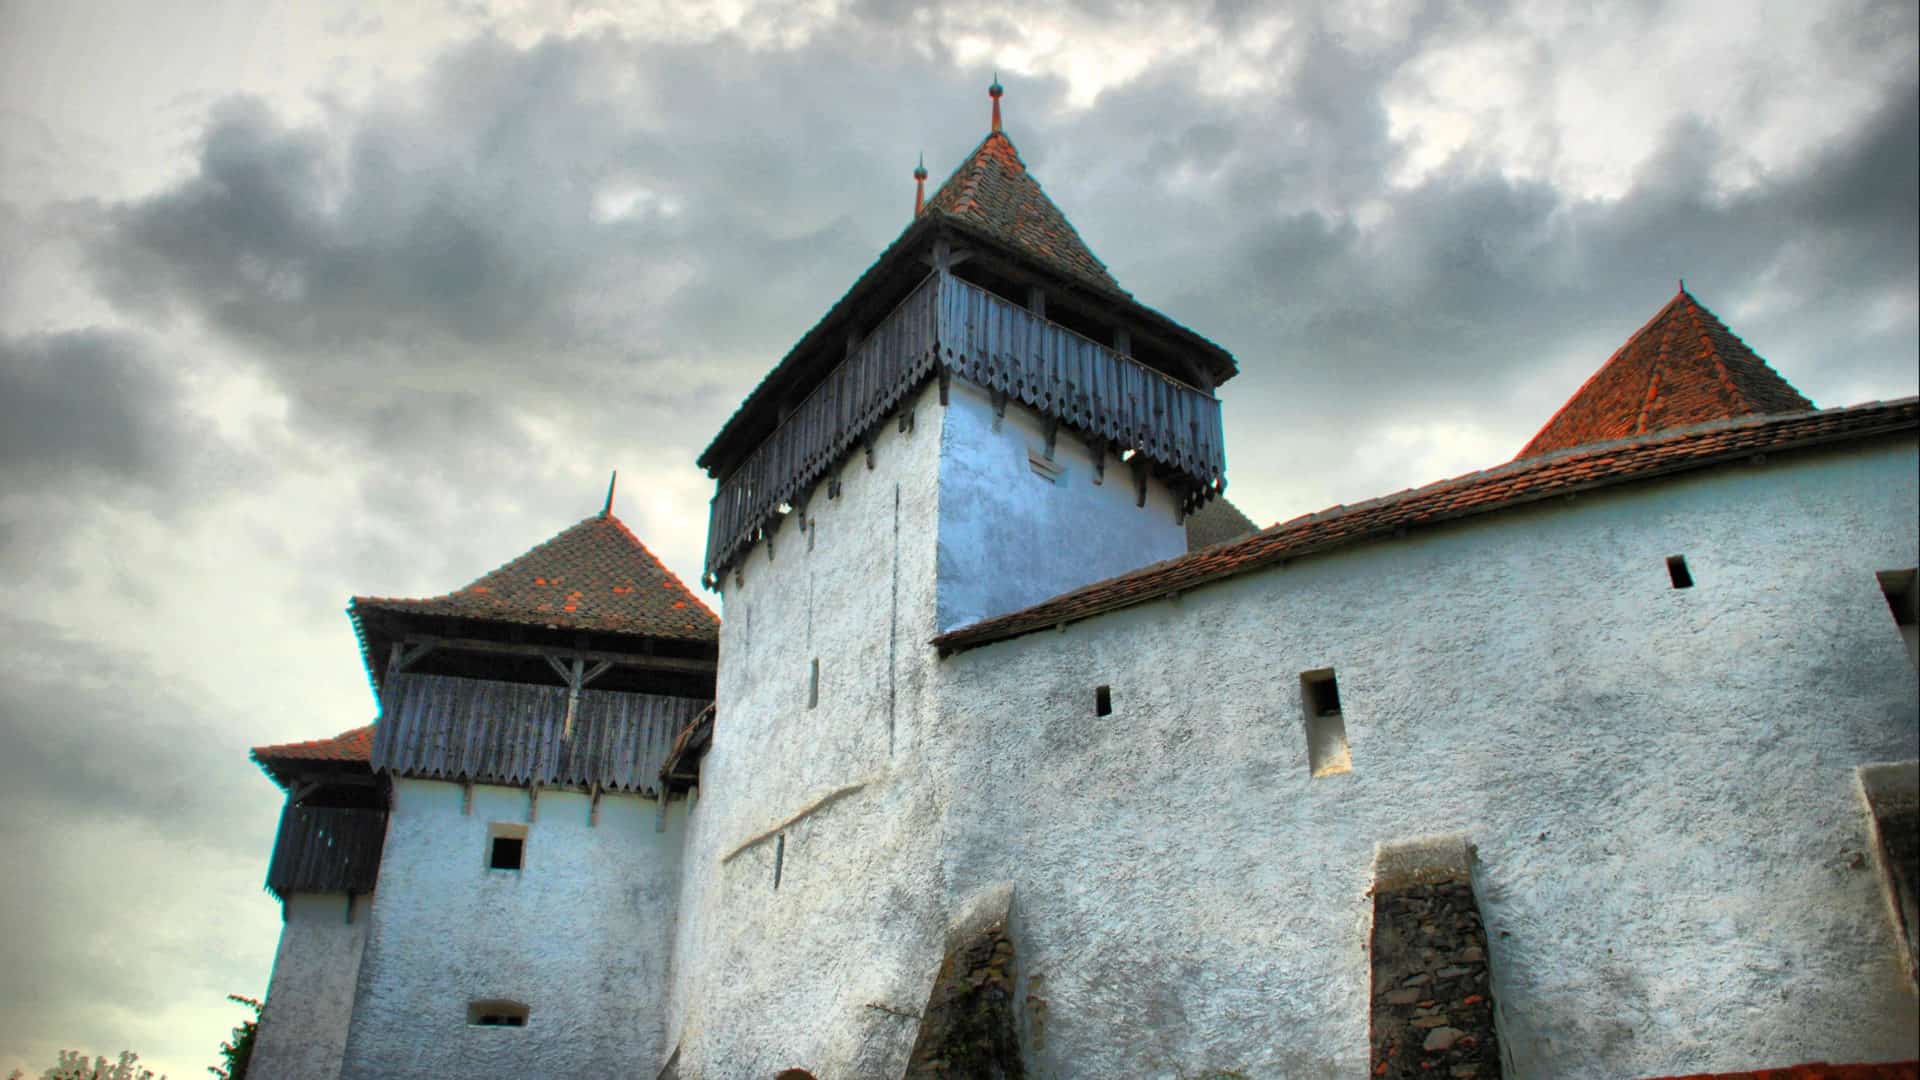 A castle in Romania lifts peaked towers toward a cloudy sky. Creative Commons courtesy photo